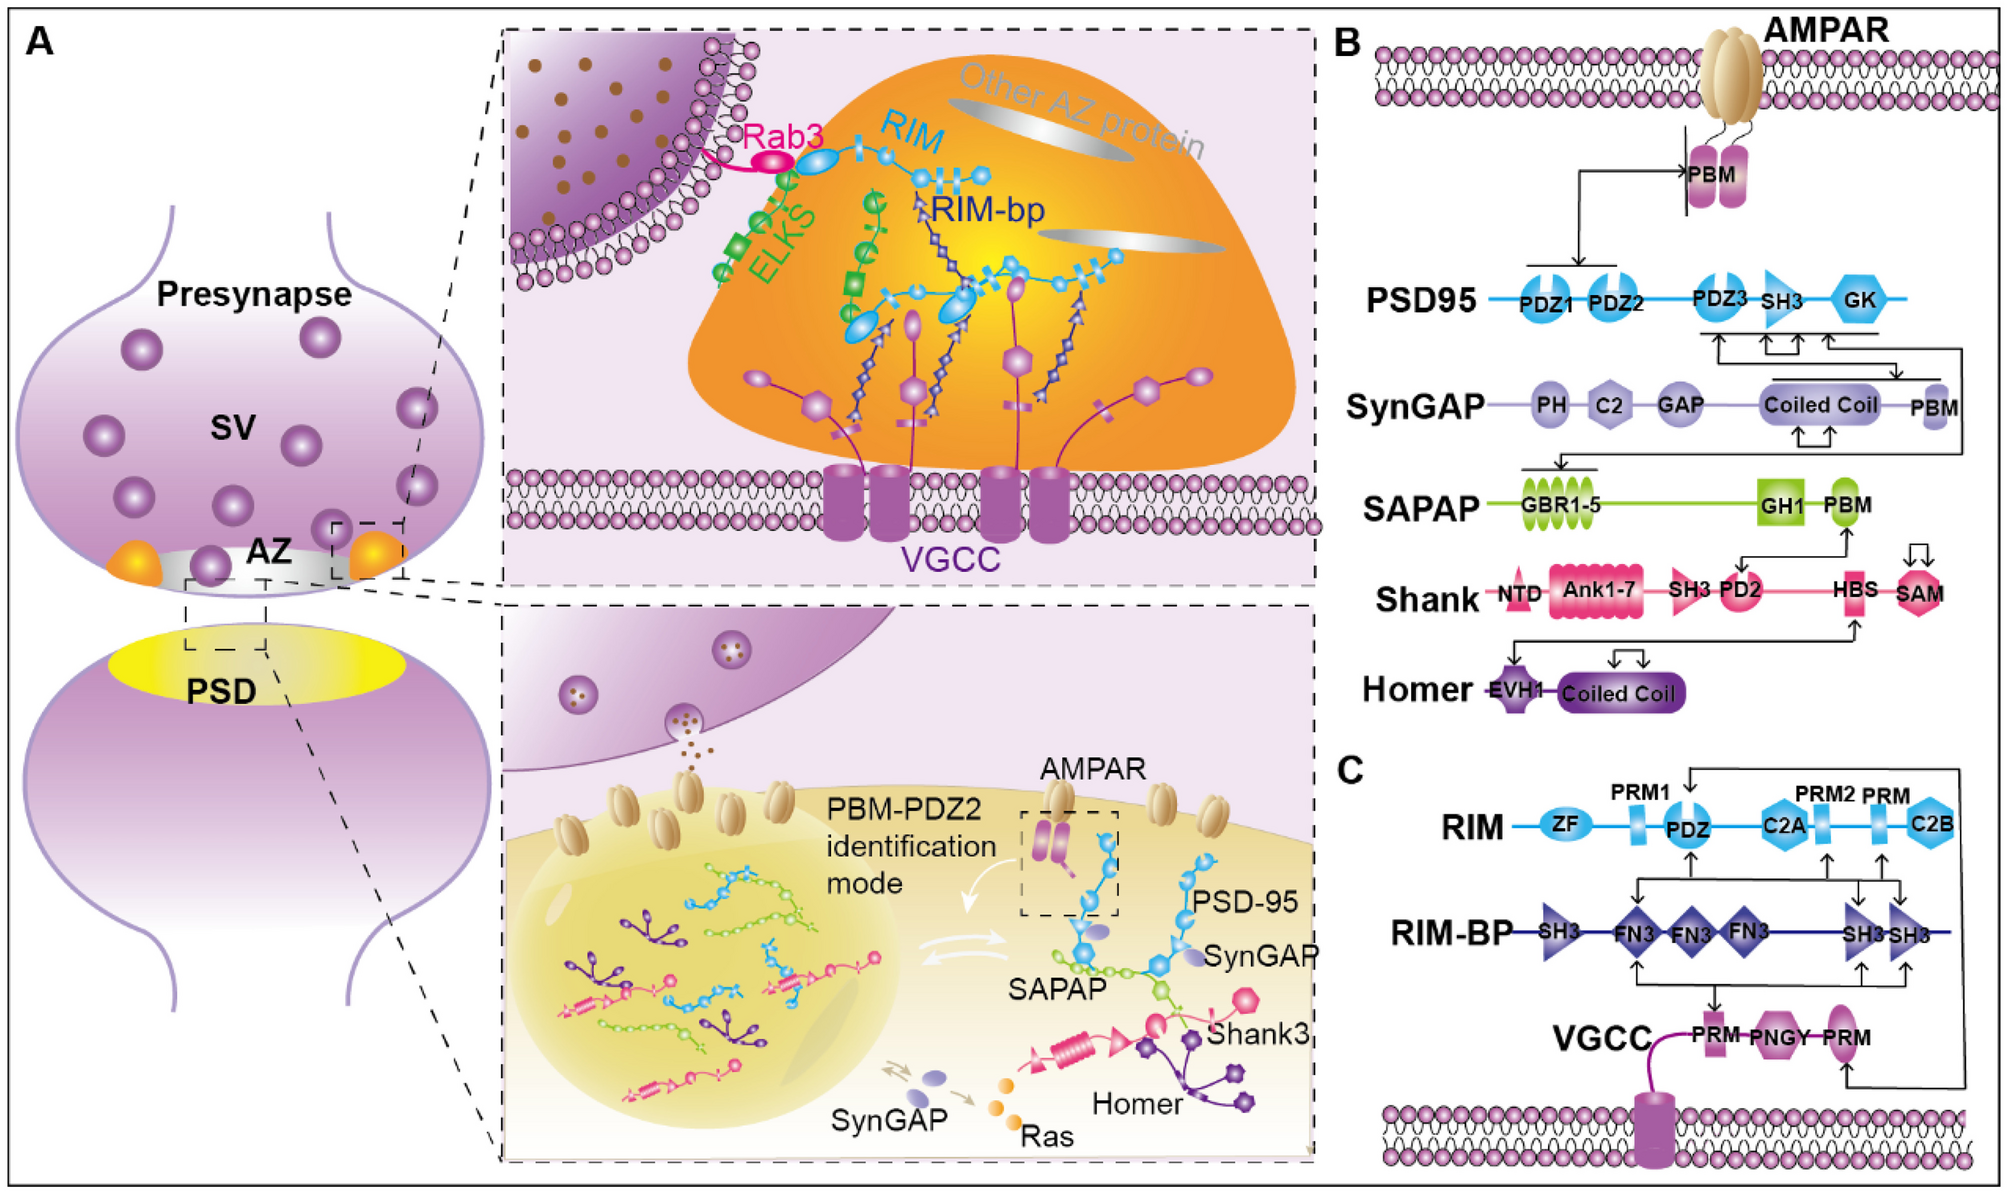 Physiological and pathological effects of phase separation in the central nervous system